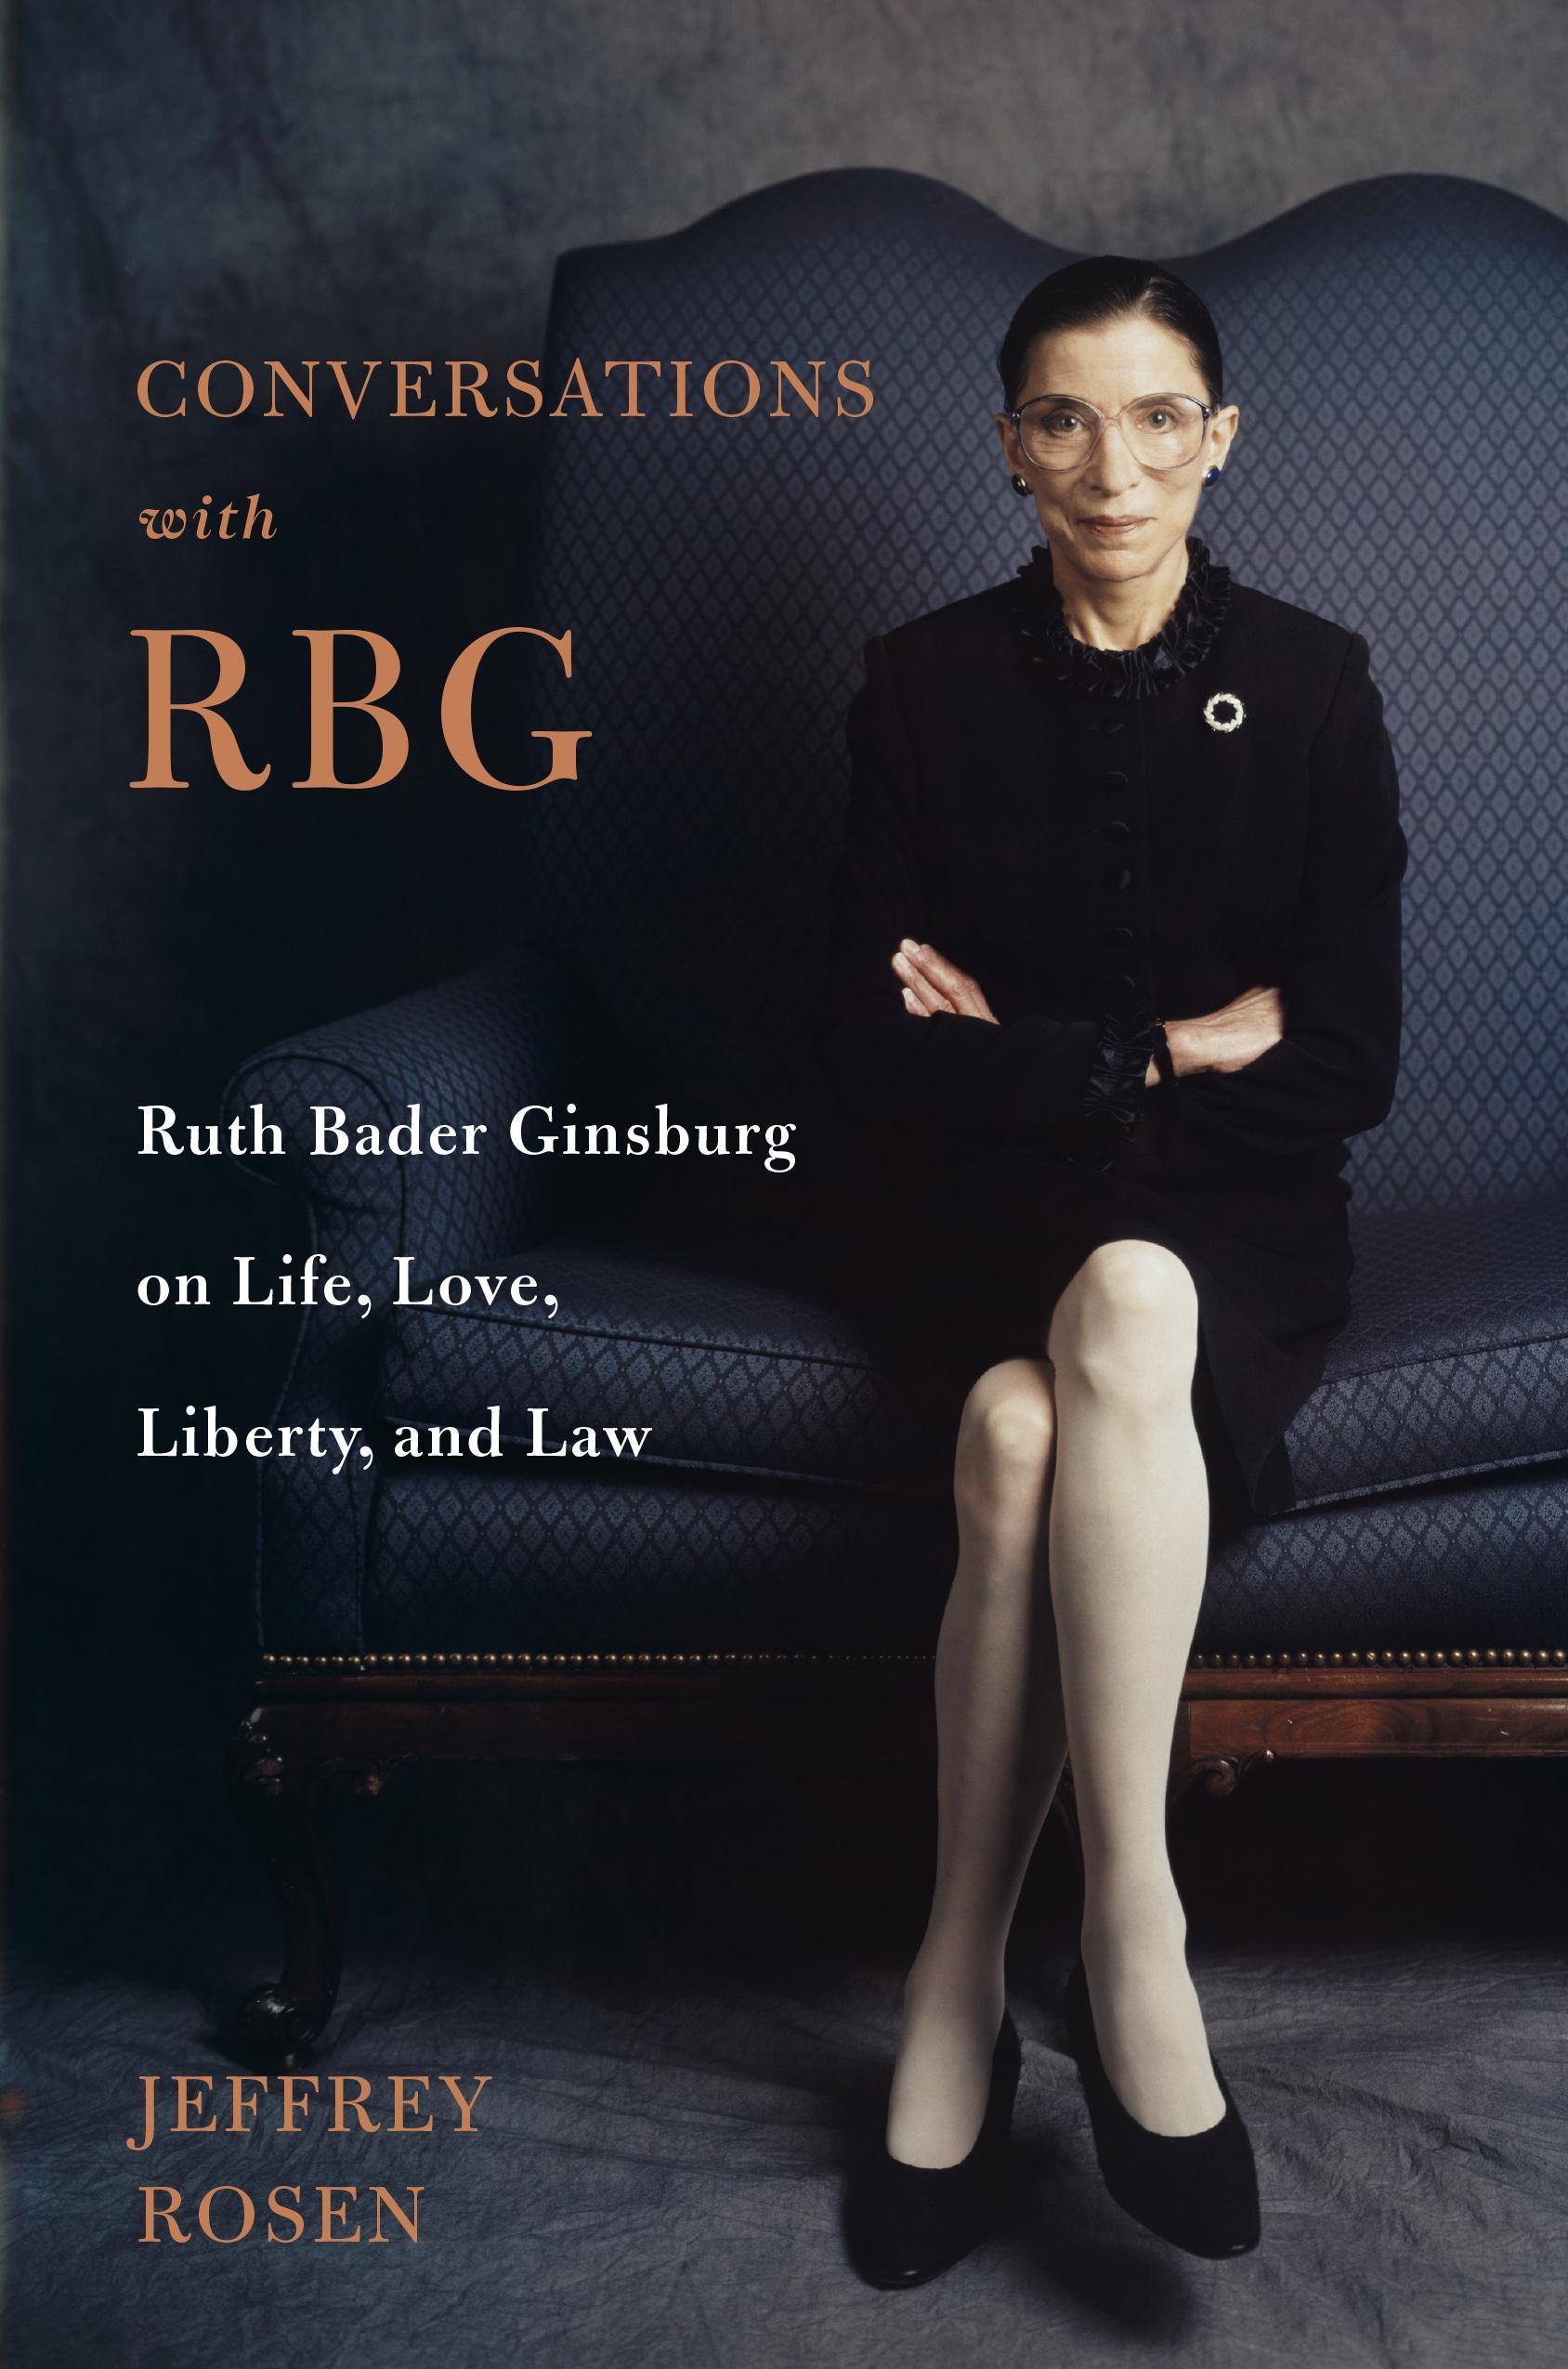 Conversations with Rbg / Ruth Bader Ginsburg on Life, Love, Liberty, and Law / Jeffrey Rosen / Buch / 259 S. / Englisch / 2019 / Henry Holt & Company / EAN 9781250235169 - Rosen, Jeffrey